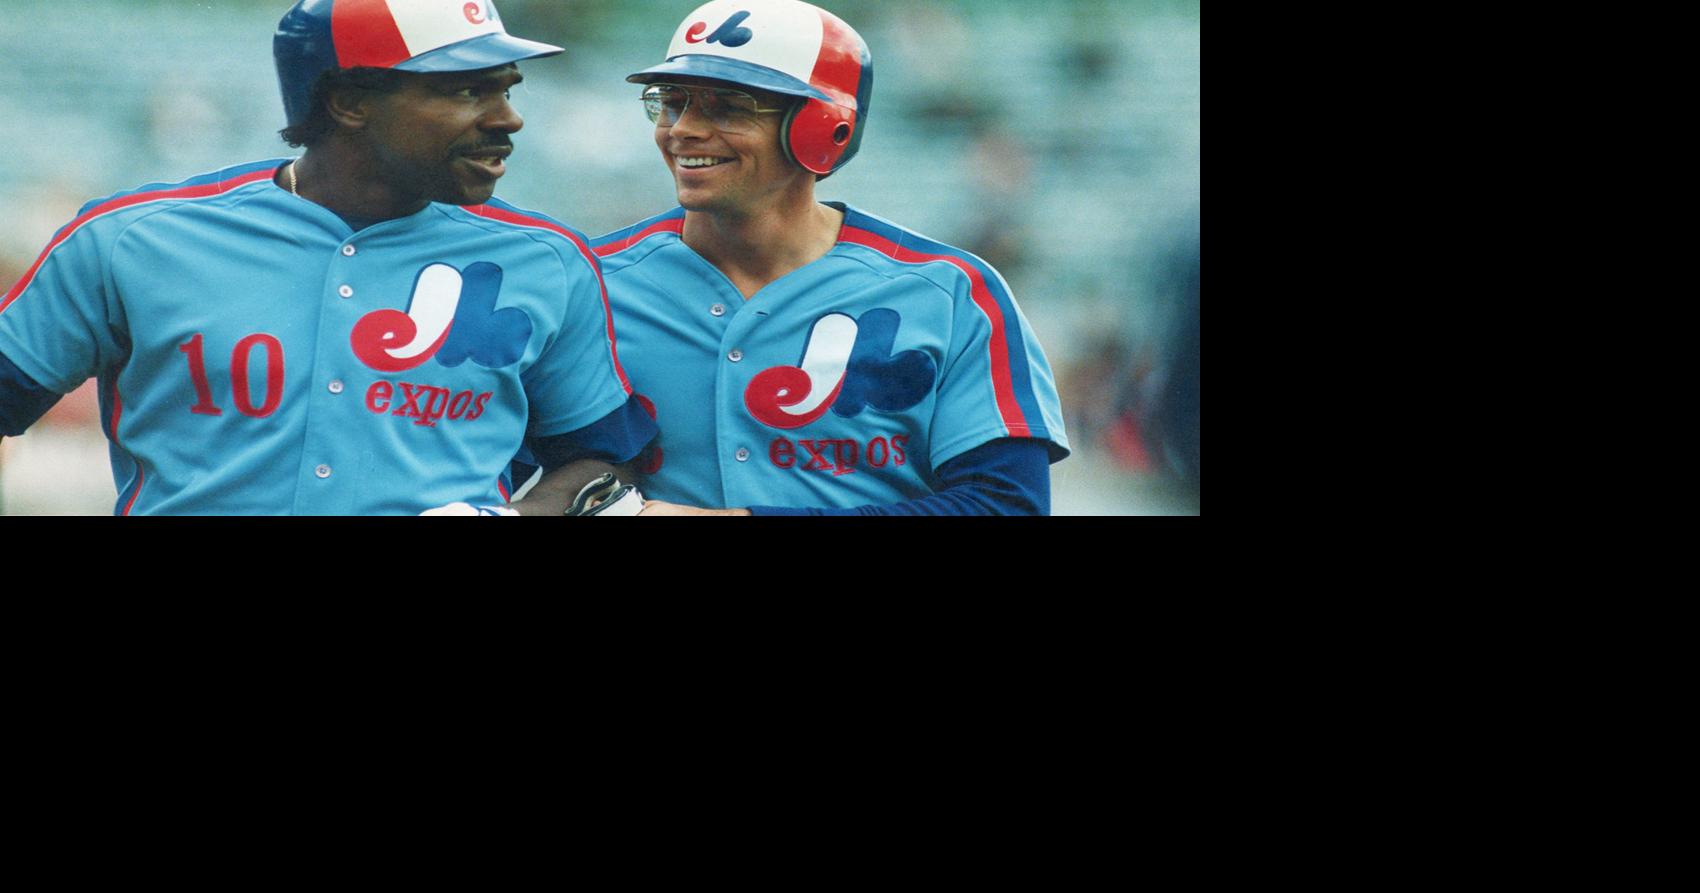 The Montreal Expos -- The decade of the 80's